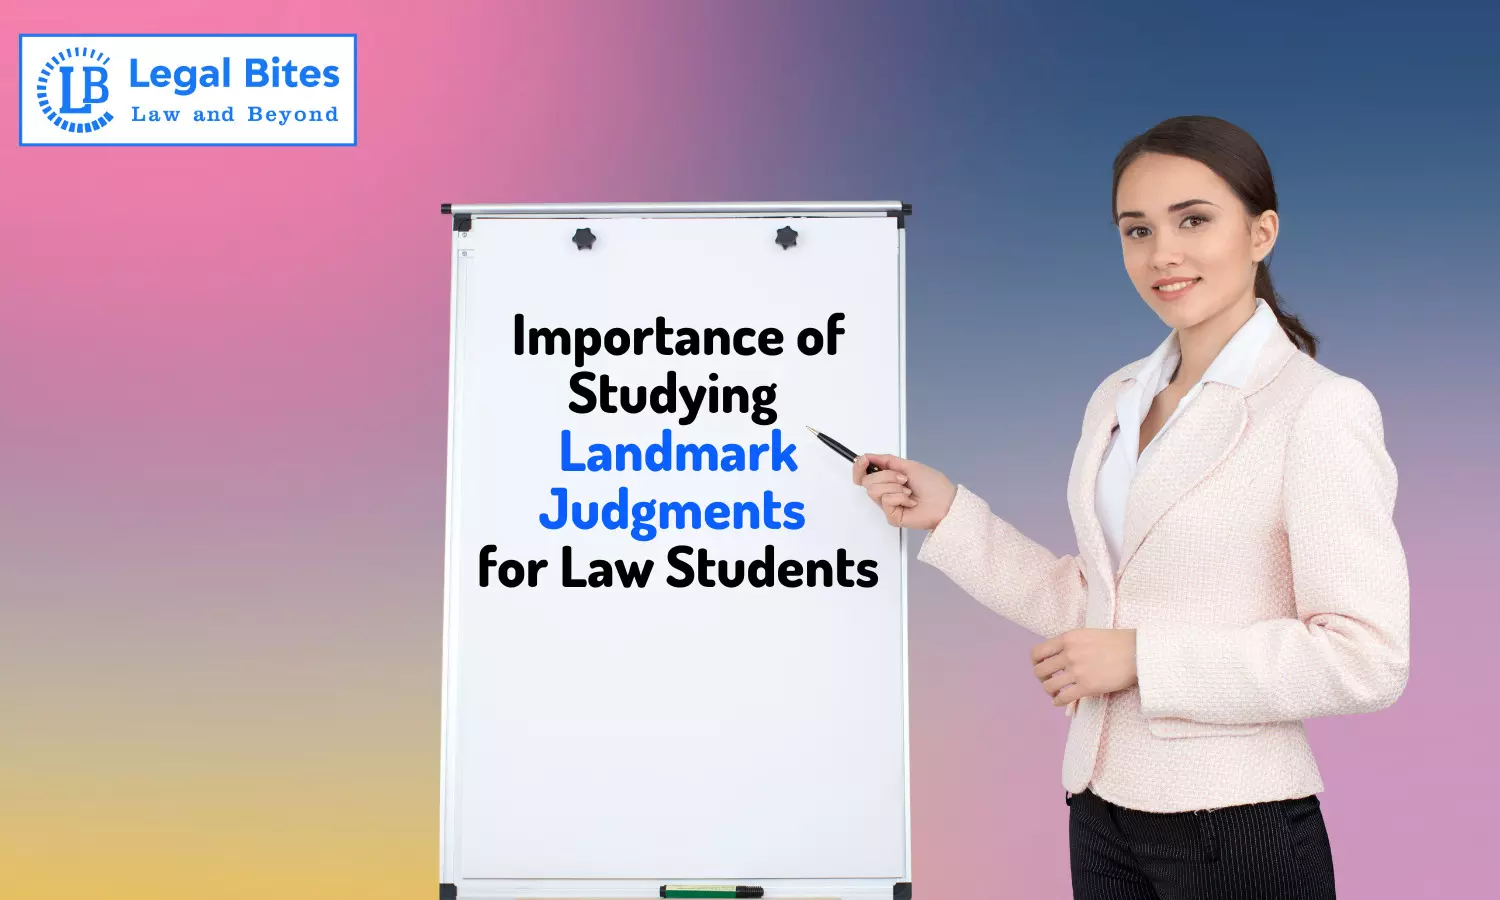 Importance of Studying Landmark Judgments for Law Students